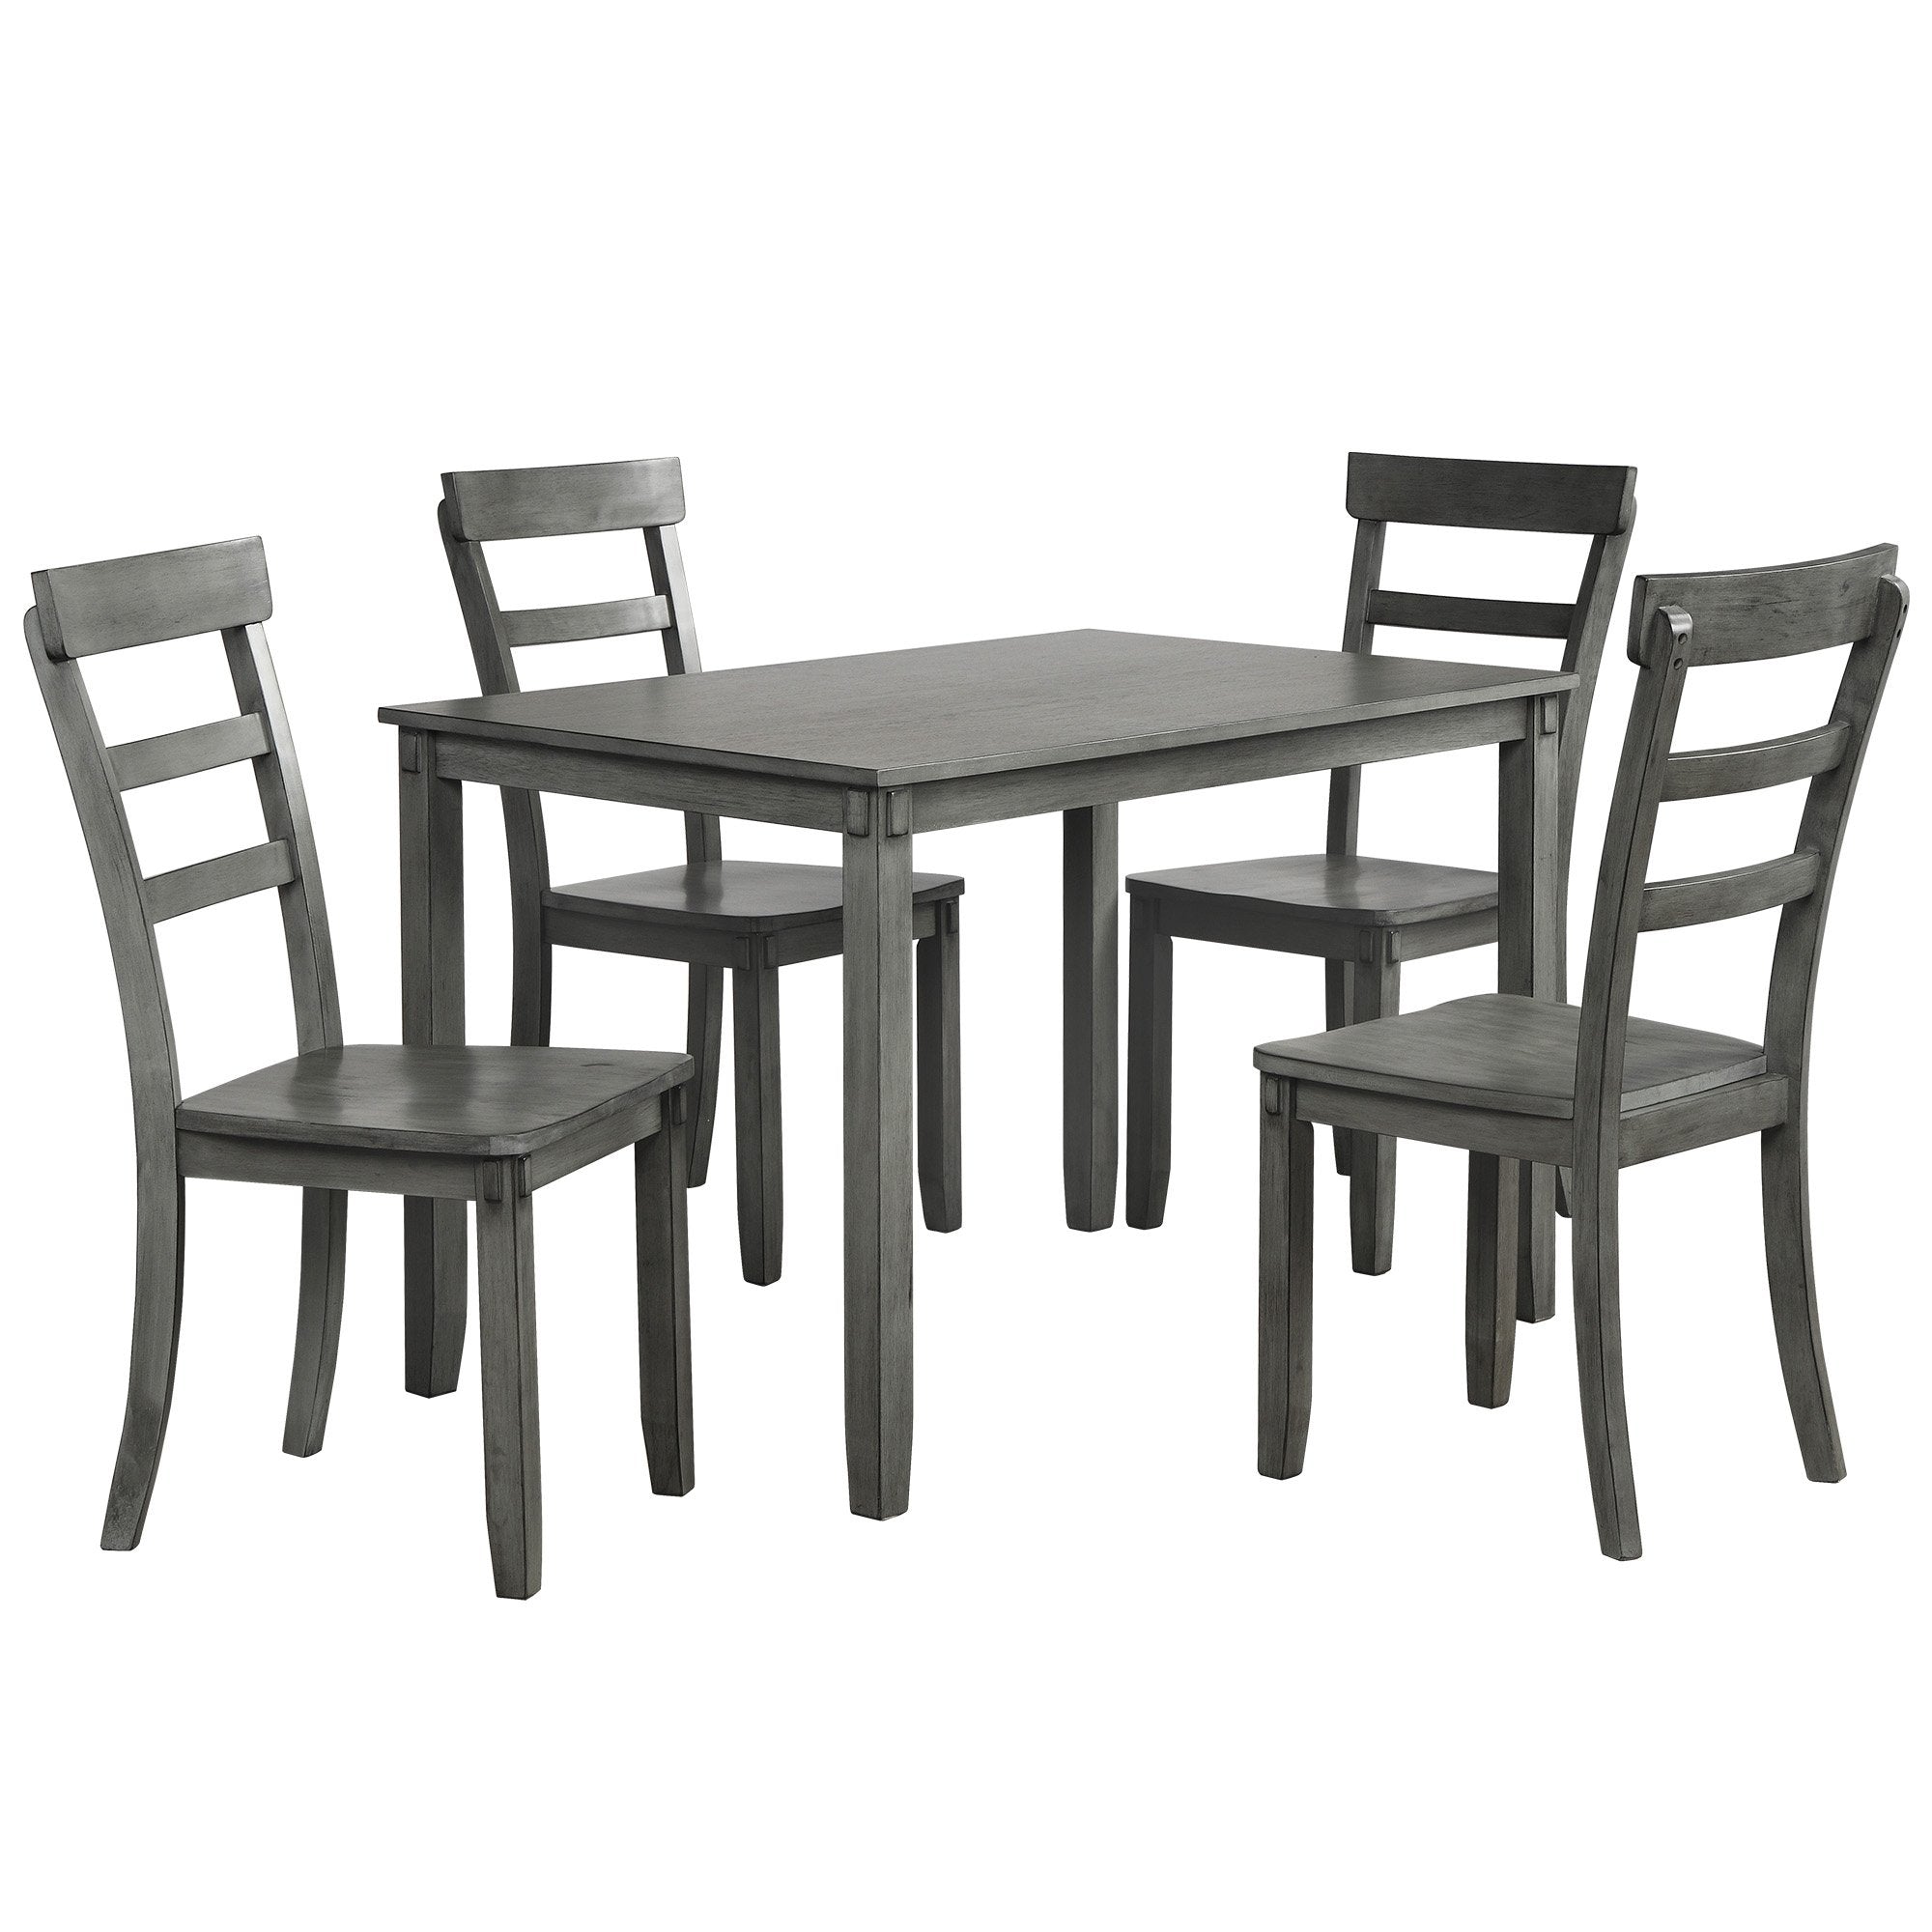 5-piece Kitchen Dining Table Set Wood Table and Chairs Set (Grey)